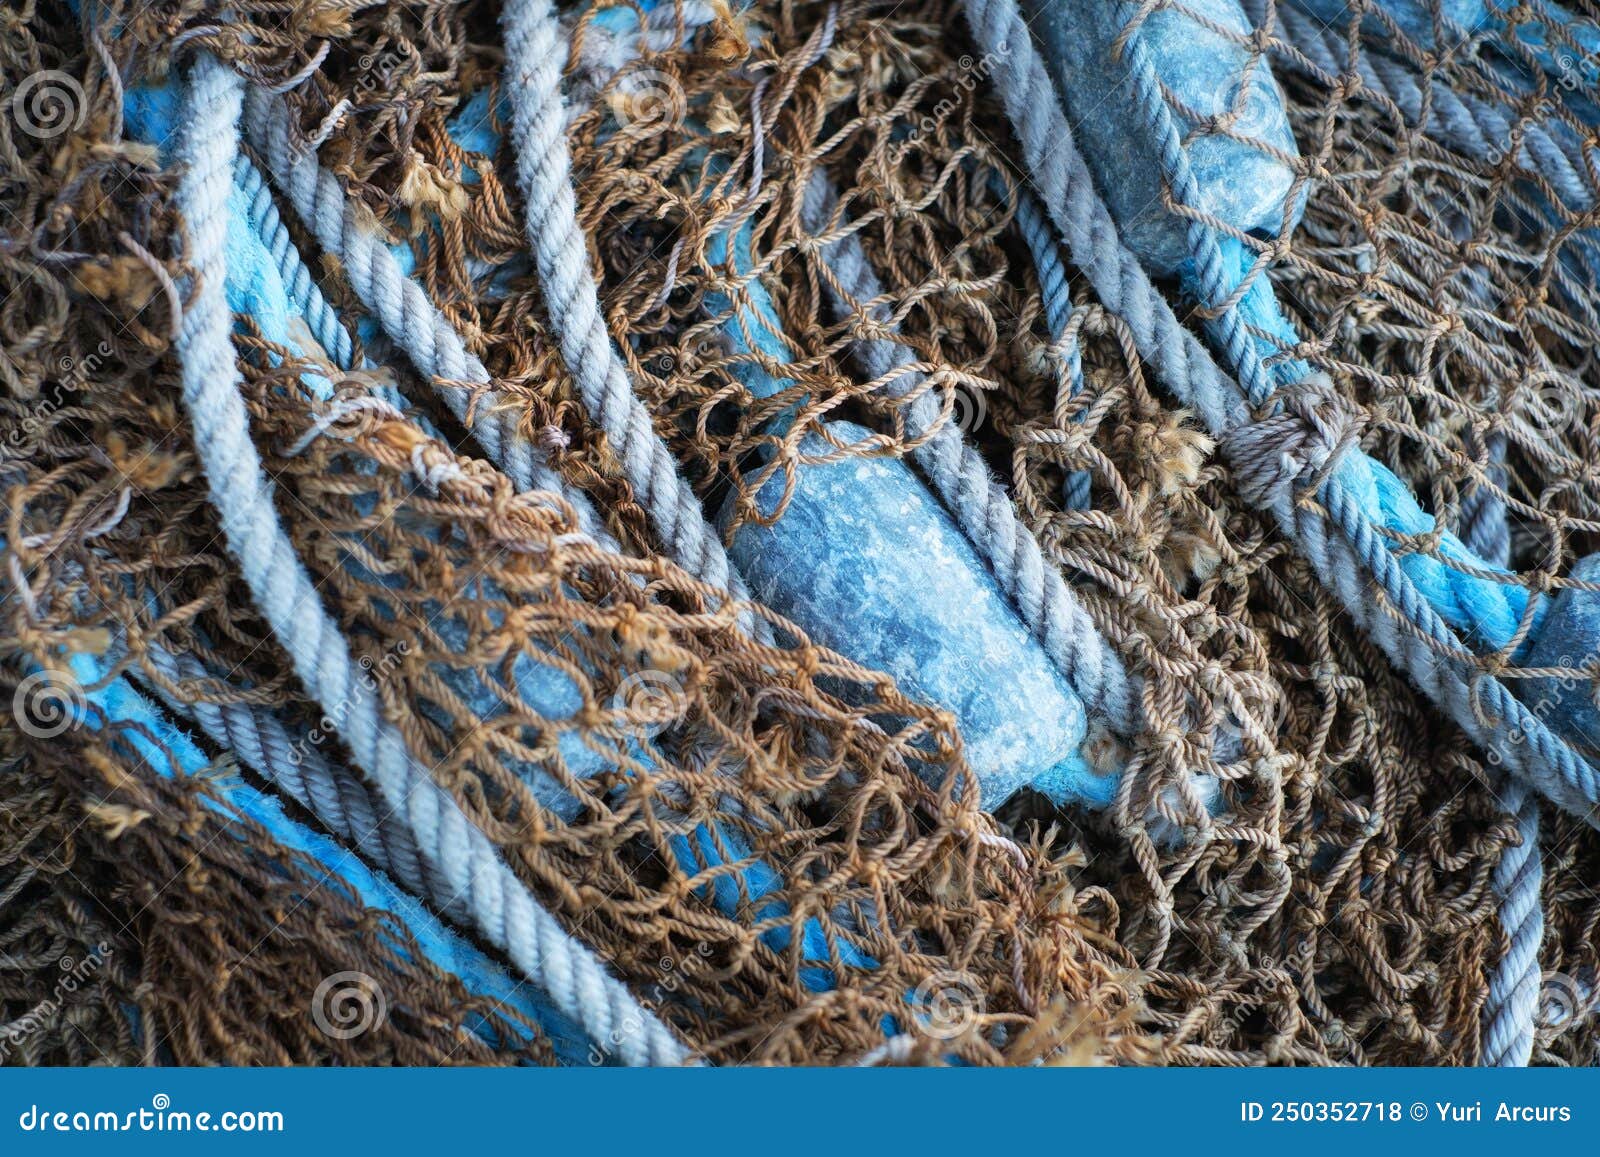 Buoys and a Net Tangible Together As Fishing Gear or Equipment at a Harbor.  Closeup of Blue Sea Markers and Mesh Piled Stock Photo - Image of tangible,  harbor: 250352718